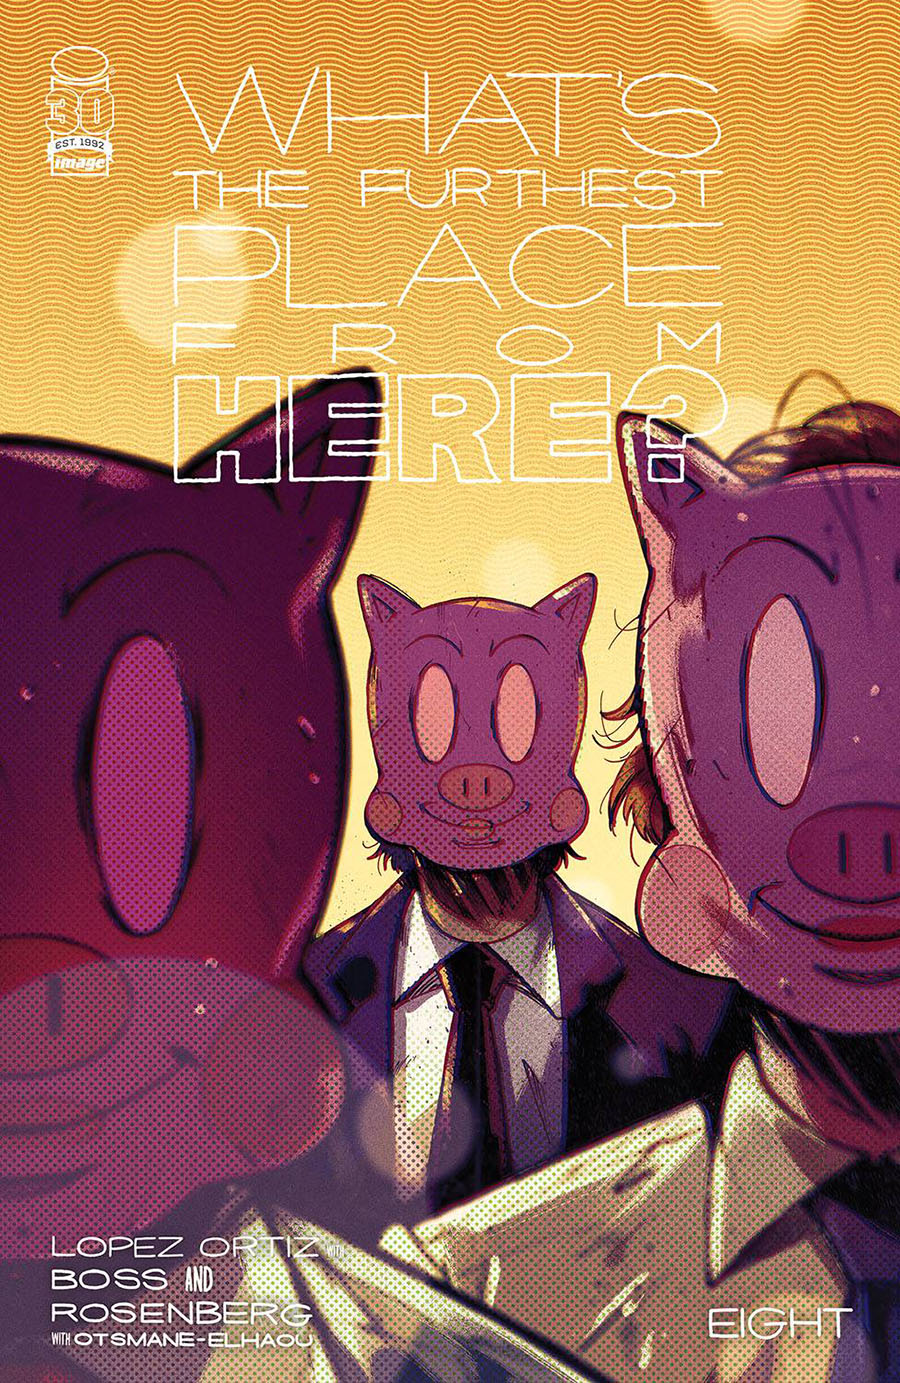 Whats The Furthest Place From Here #8 Cover B Variant Ricardo Lopez Ortiz Cover